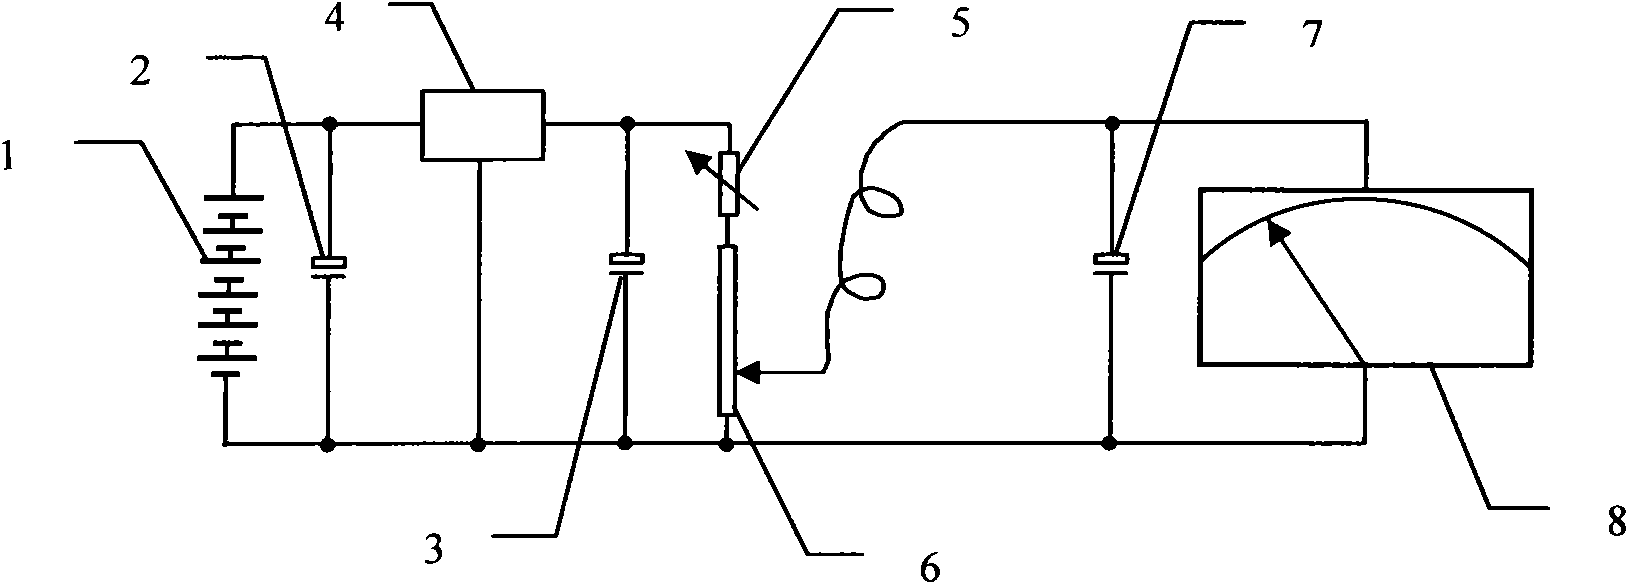 Flowmeter for final-stage channel